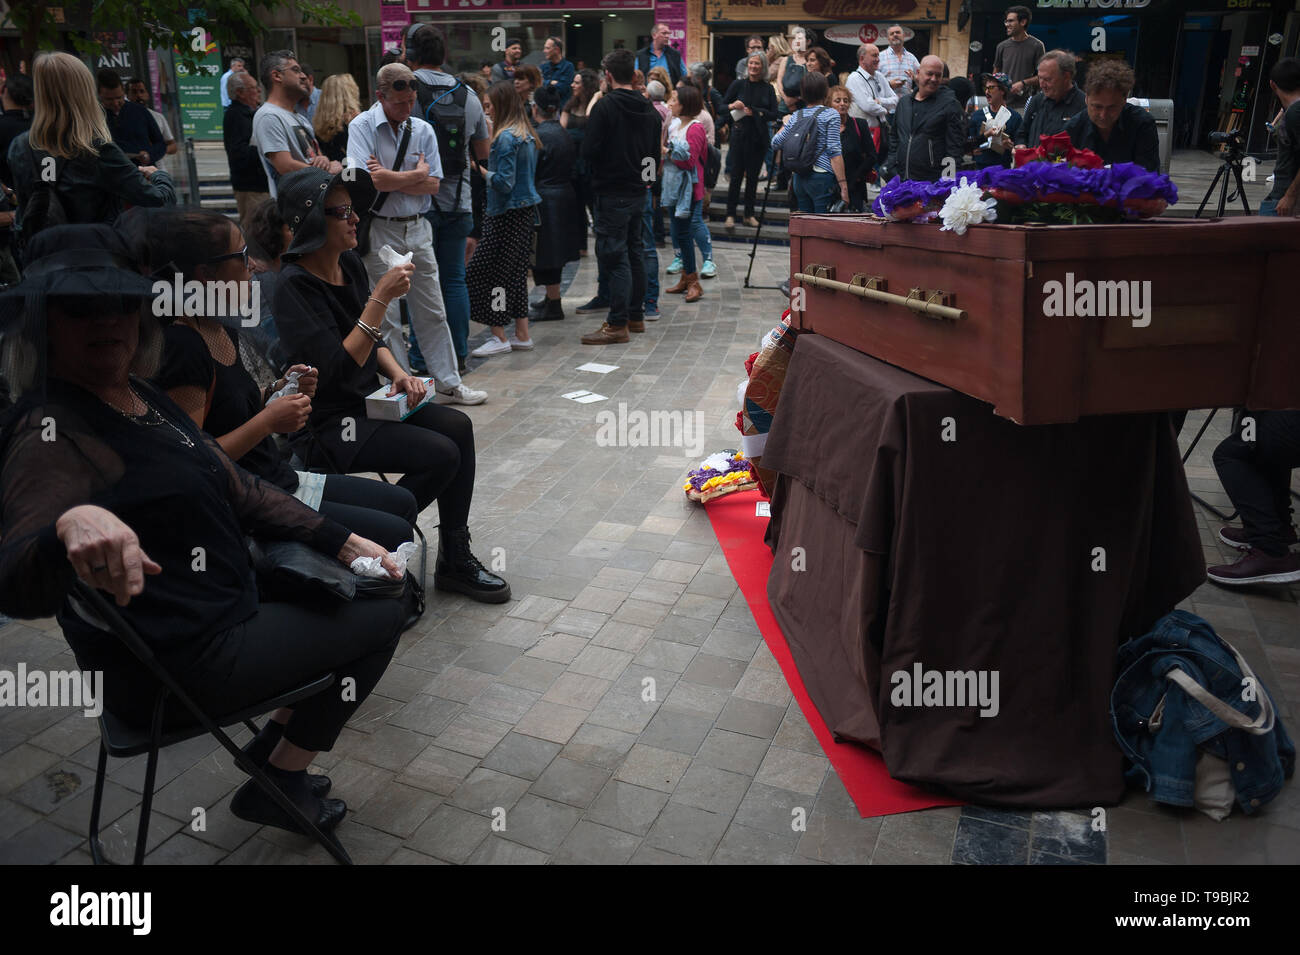 A funeral procession seen being held during the protest. The association of down town neighbours from Malaga have organized a symbolic funeral of a neighbour as part of a performance against the high cost of housing and rent because of property speculation in Malaga centre. Stock Photo